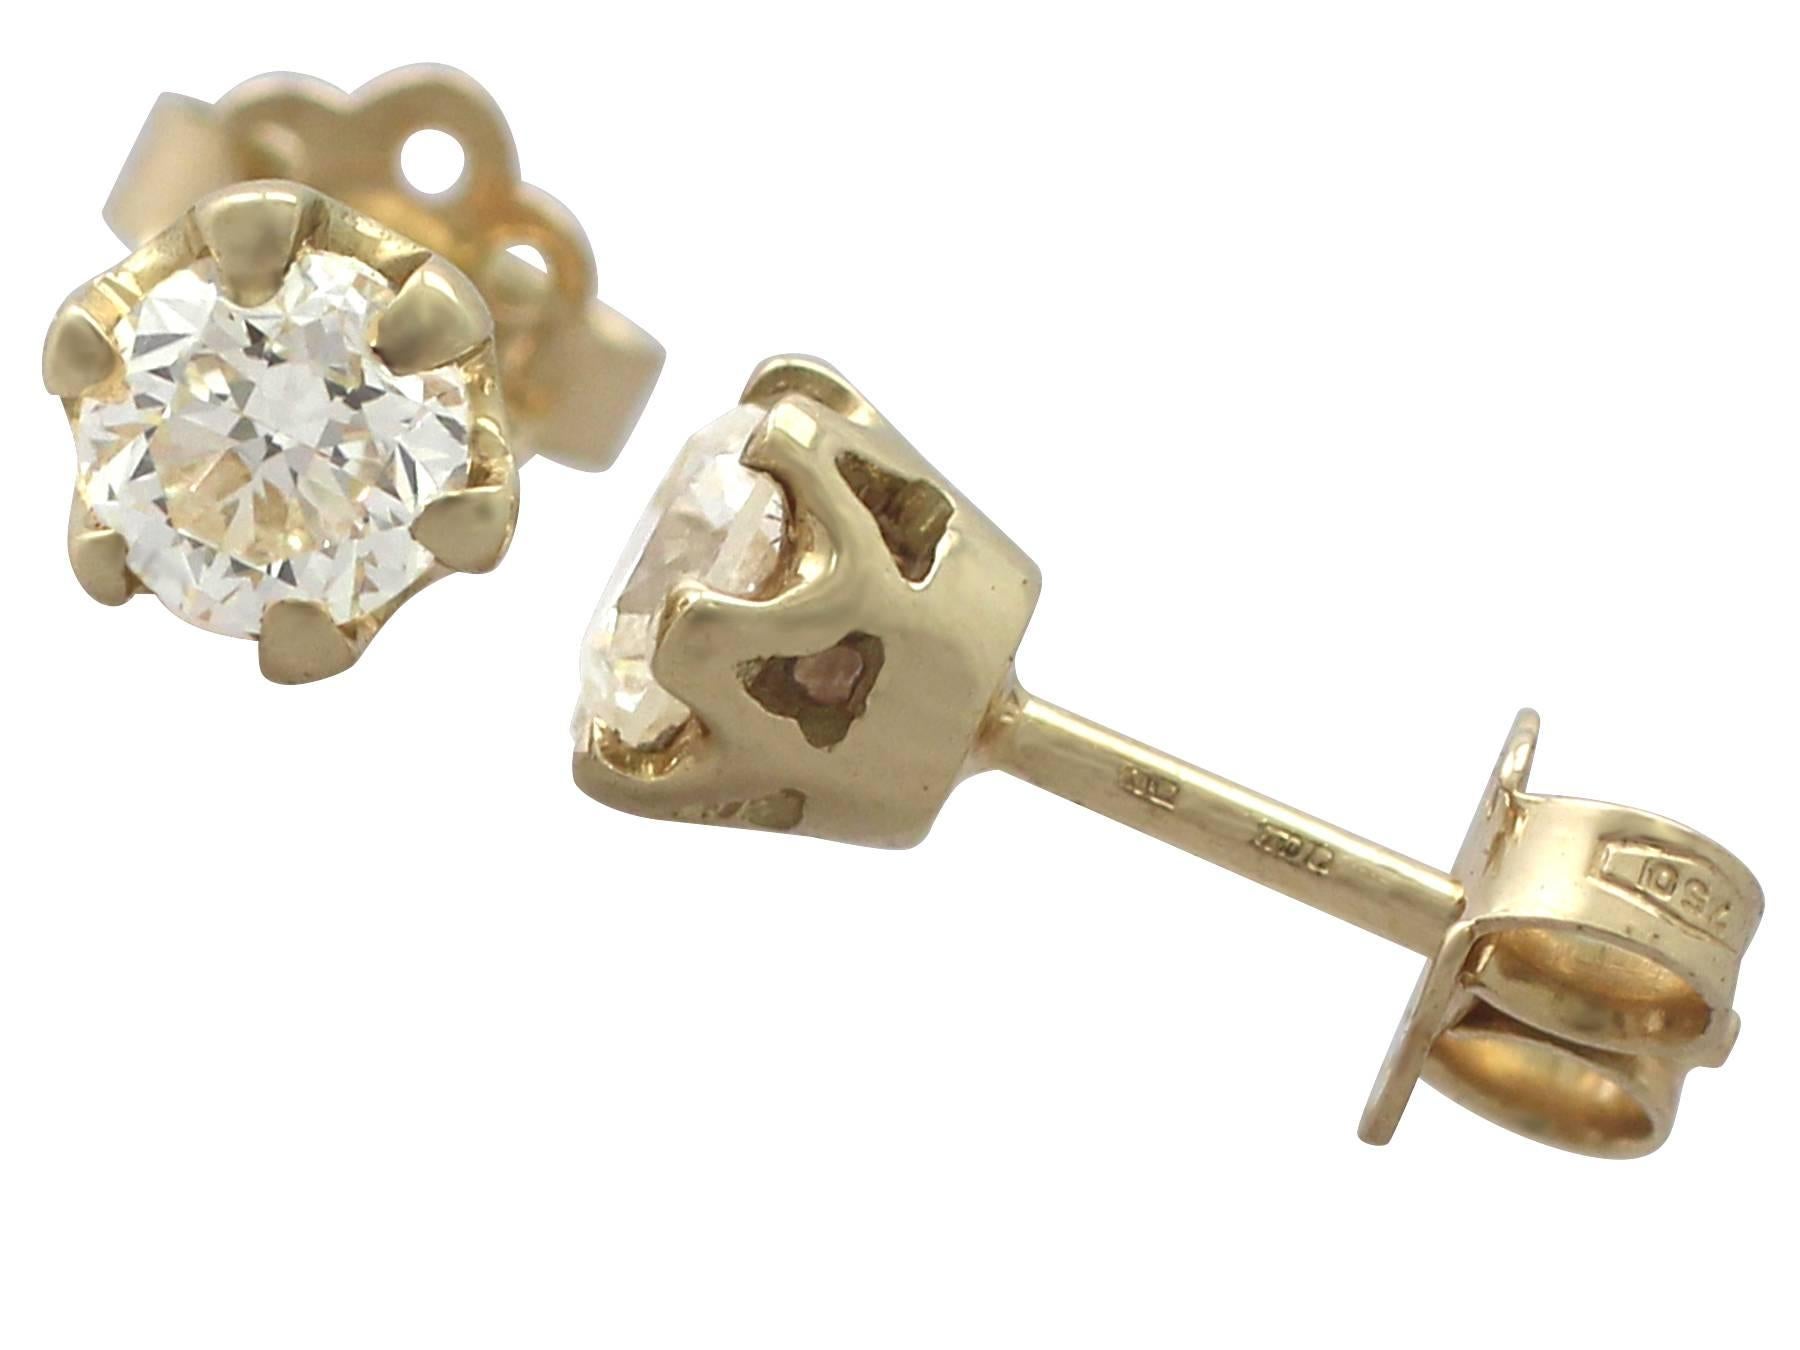 A fine and impressive pair of vintage 0.84 carat diamond (total) stud earrings in 18 karat yellow gold; part of our diamond jewelry and estate jewelry collections

Description

These fine and impressive diamond stud earrings have been crafted in